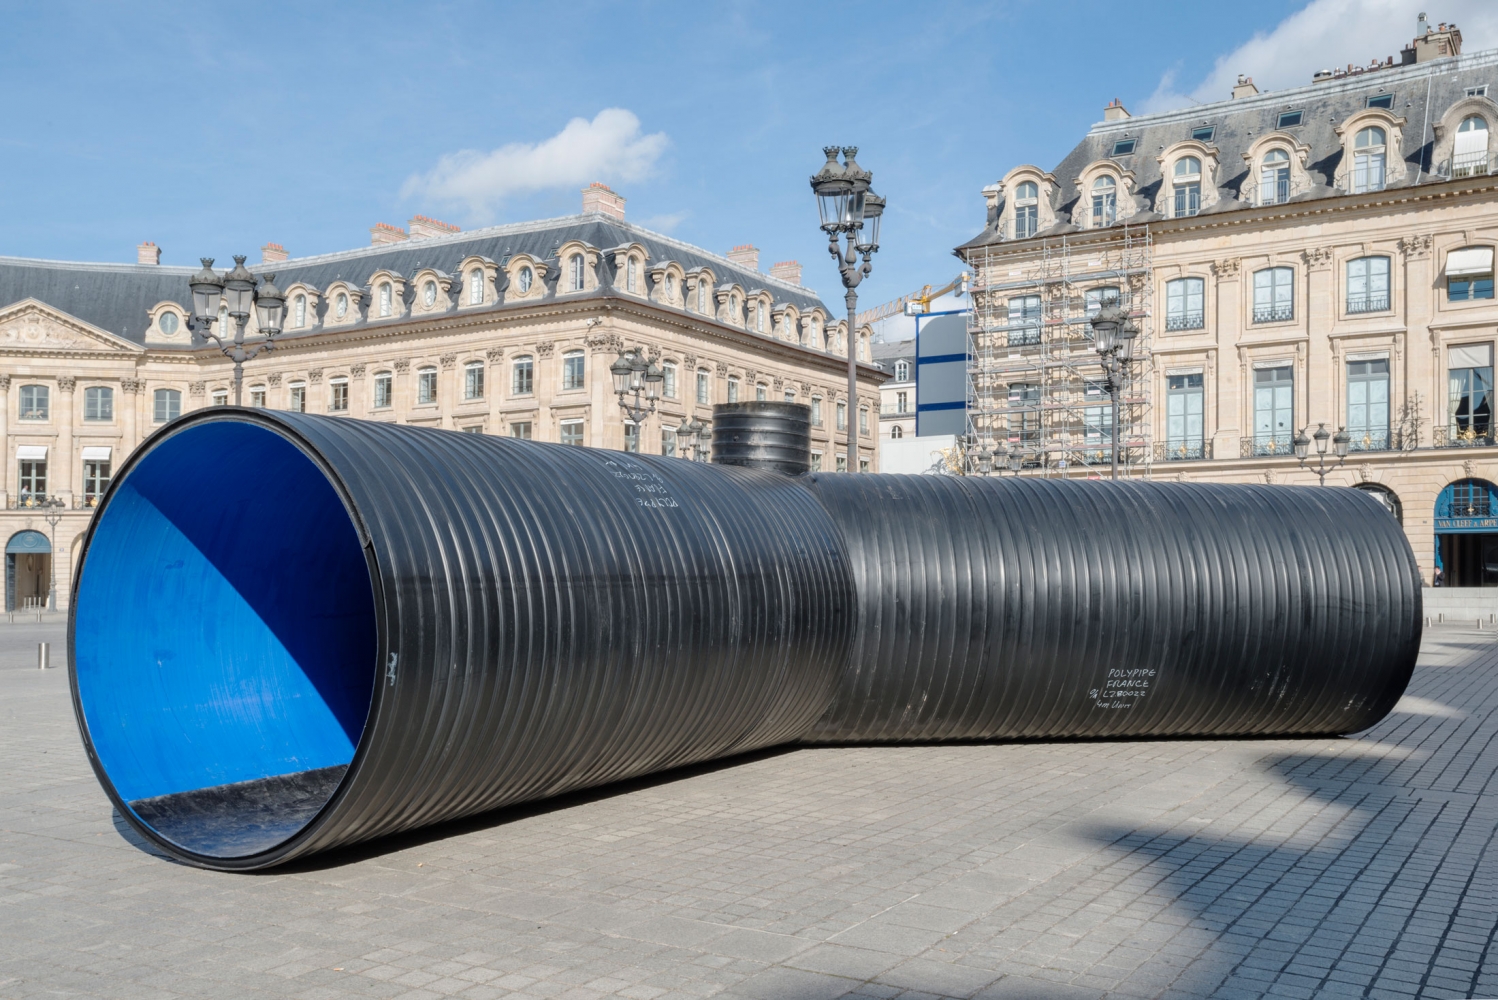 Oscar Tuazon
Sun Riot, 2017
One of four elements in&amp;nbsp;Une Colonne d&amp;#39;Eau, 2017
Thermoplastic hoses, tree trunks
105 2/3 x 82 3/4 x 392 1/10 inches
(268 x 210 x 996 cm)
Installation view
Place Vend&amp;ocirc;me, Paris (October 16 &amp;ndash; November 9, 2017)
Photograph by Marc Domage